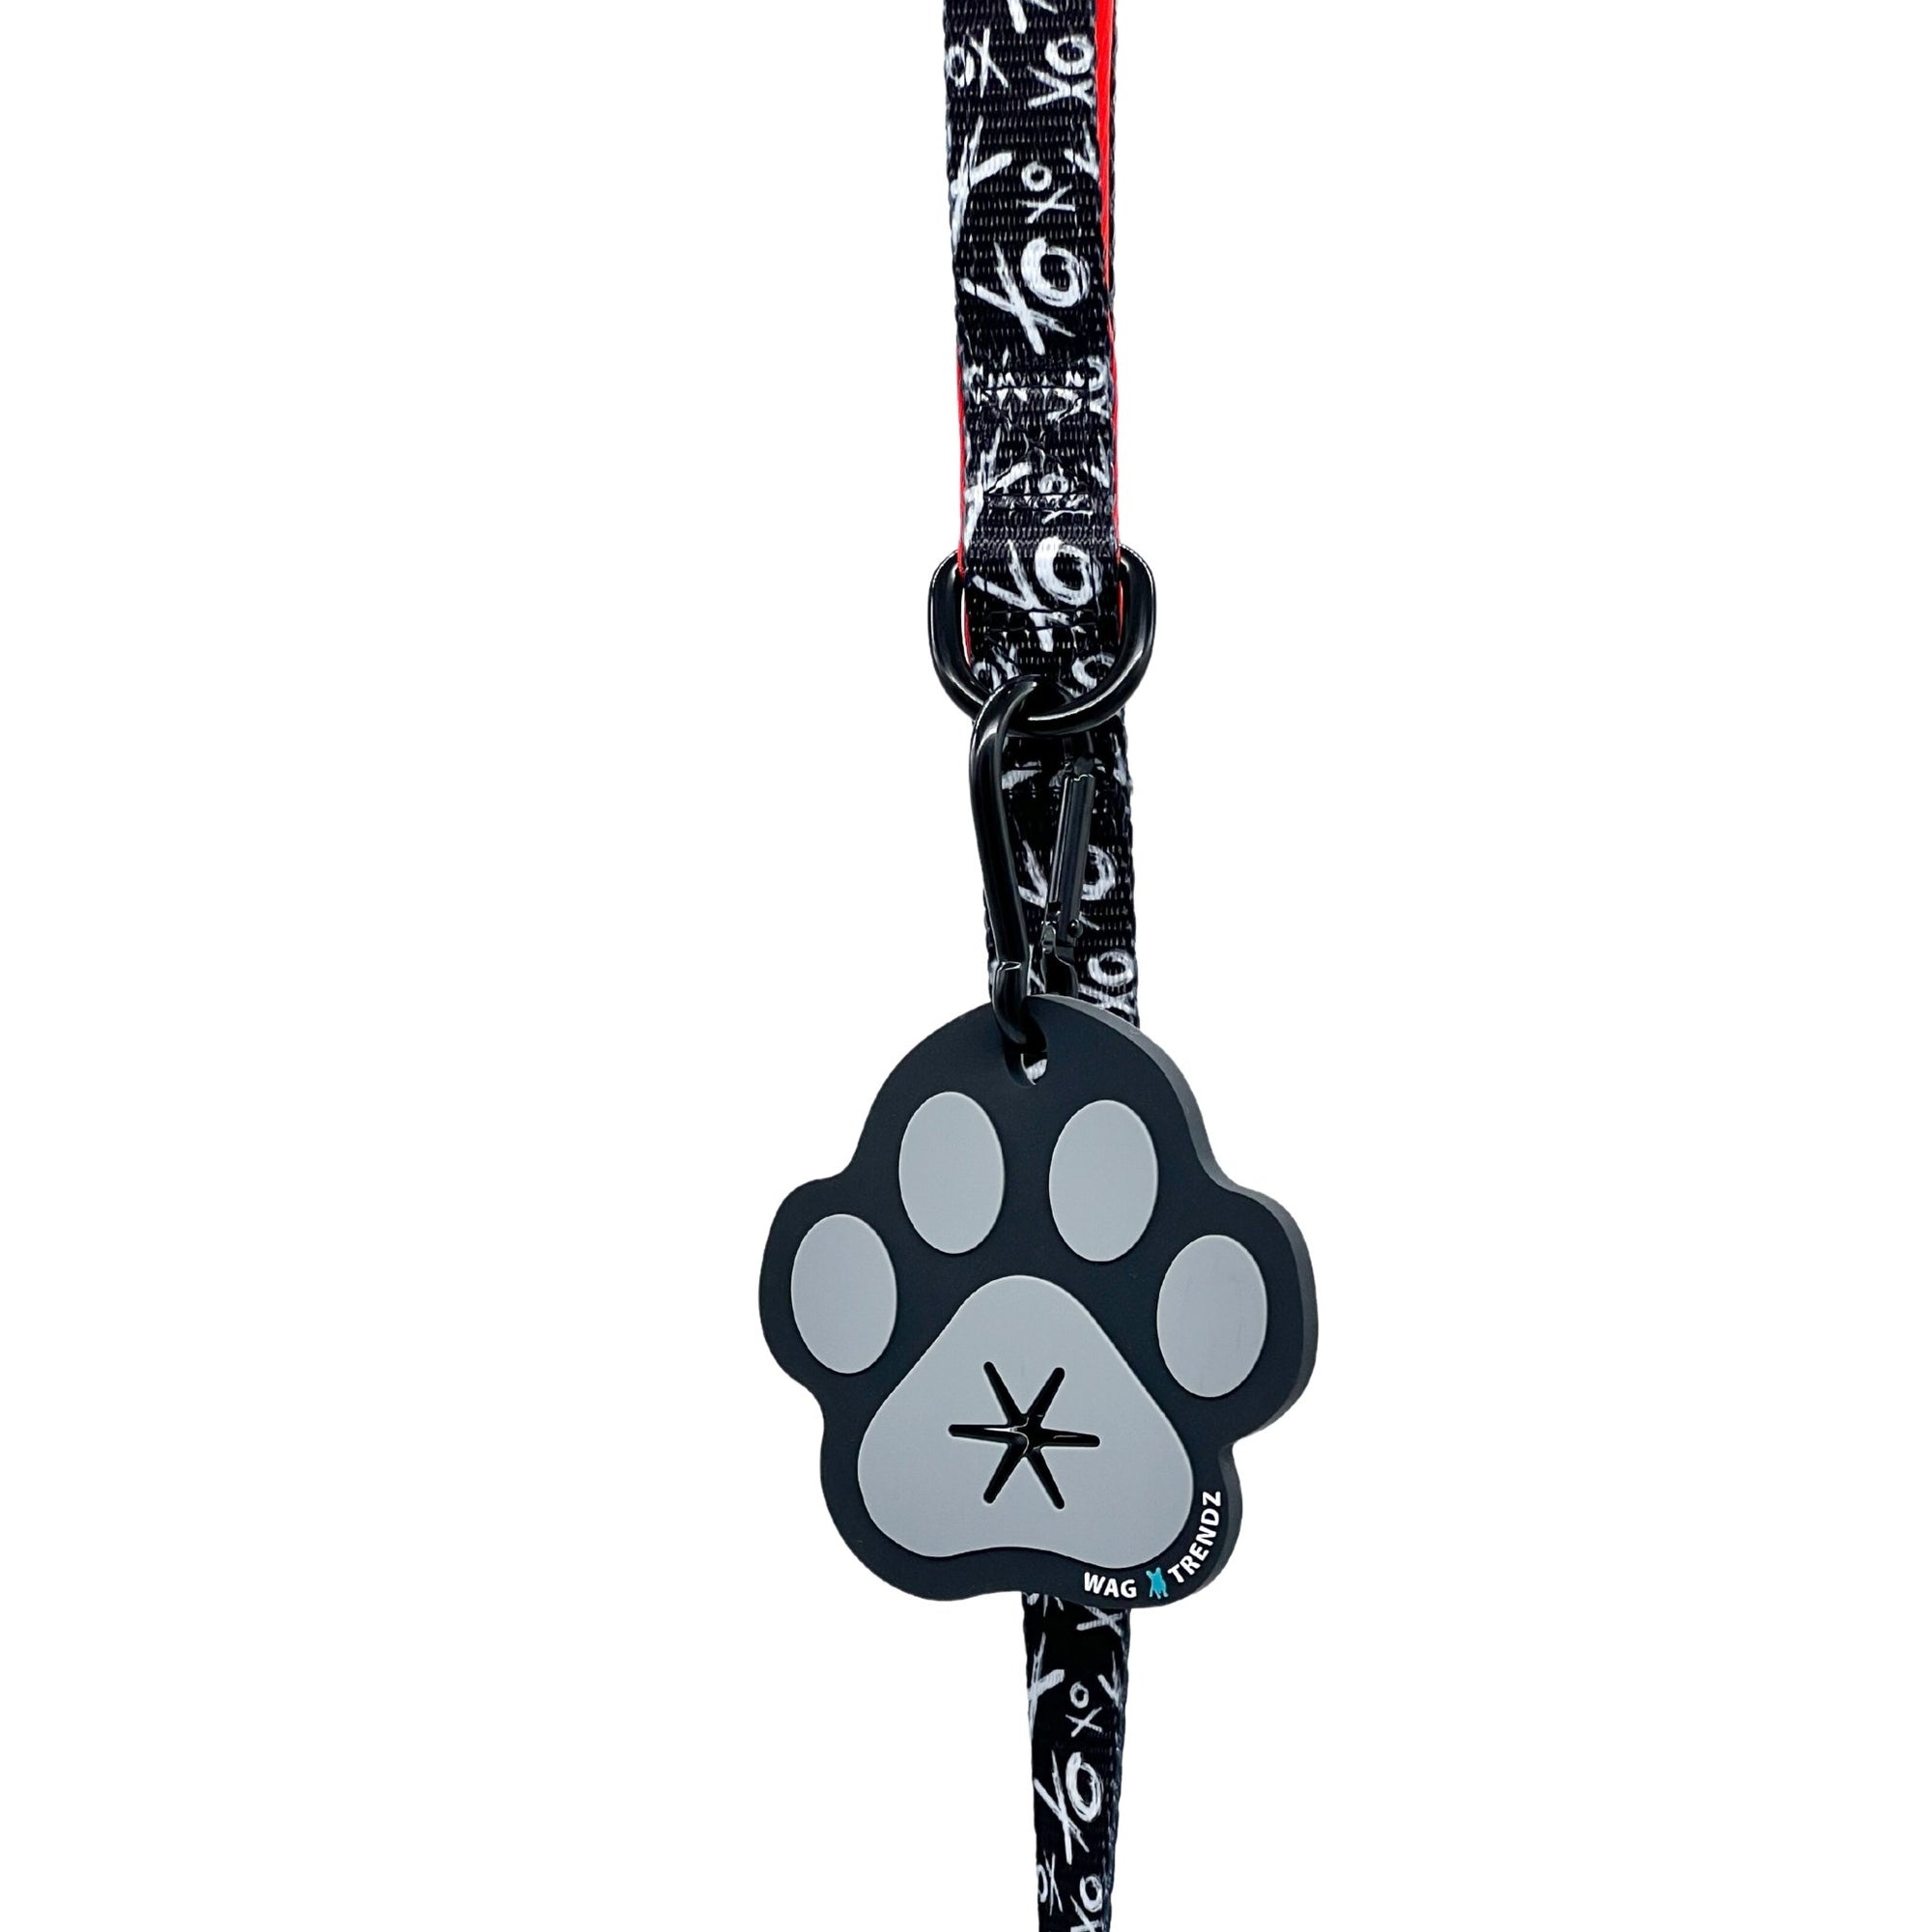 Poop Buddy - black and gray resin dog paw - hanging on a black &amp; white XO dog leash with red accents - against white background - Wag Trendz